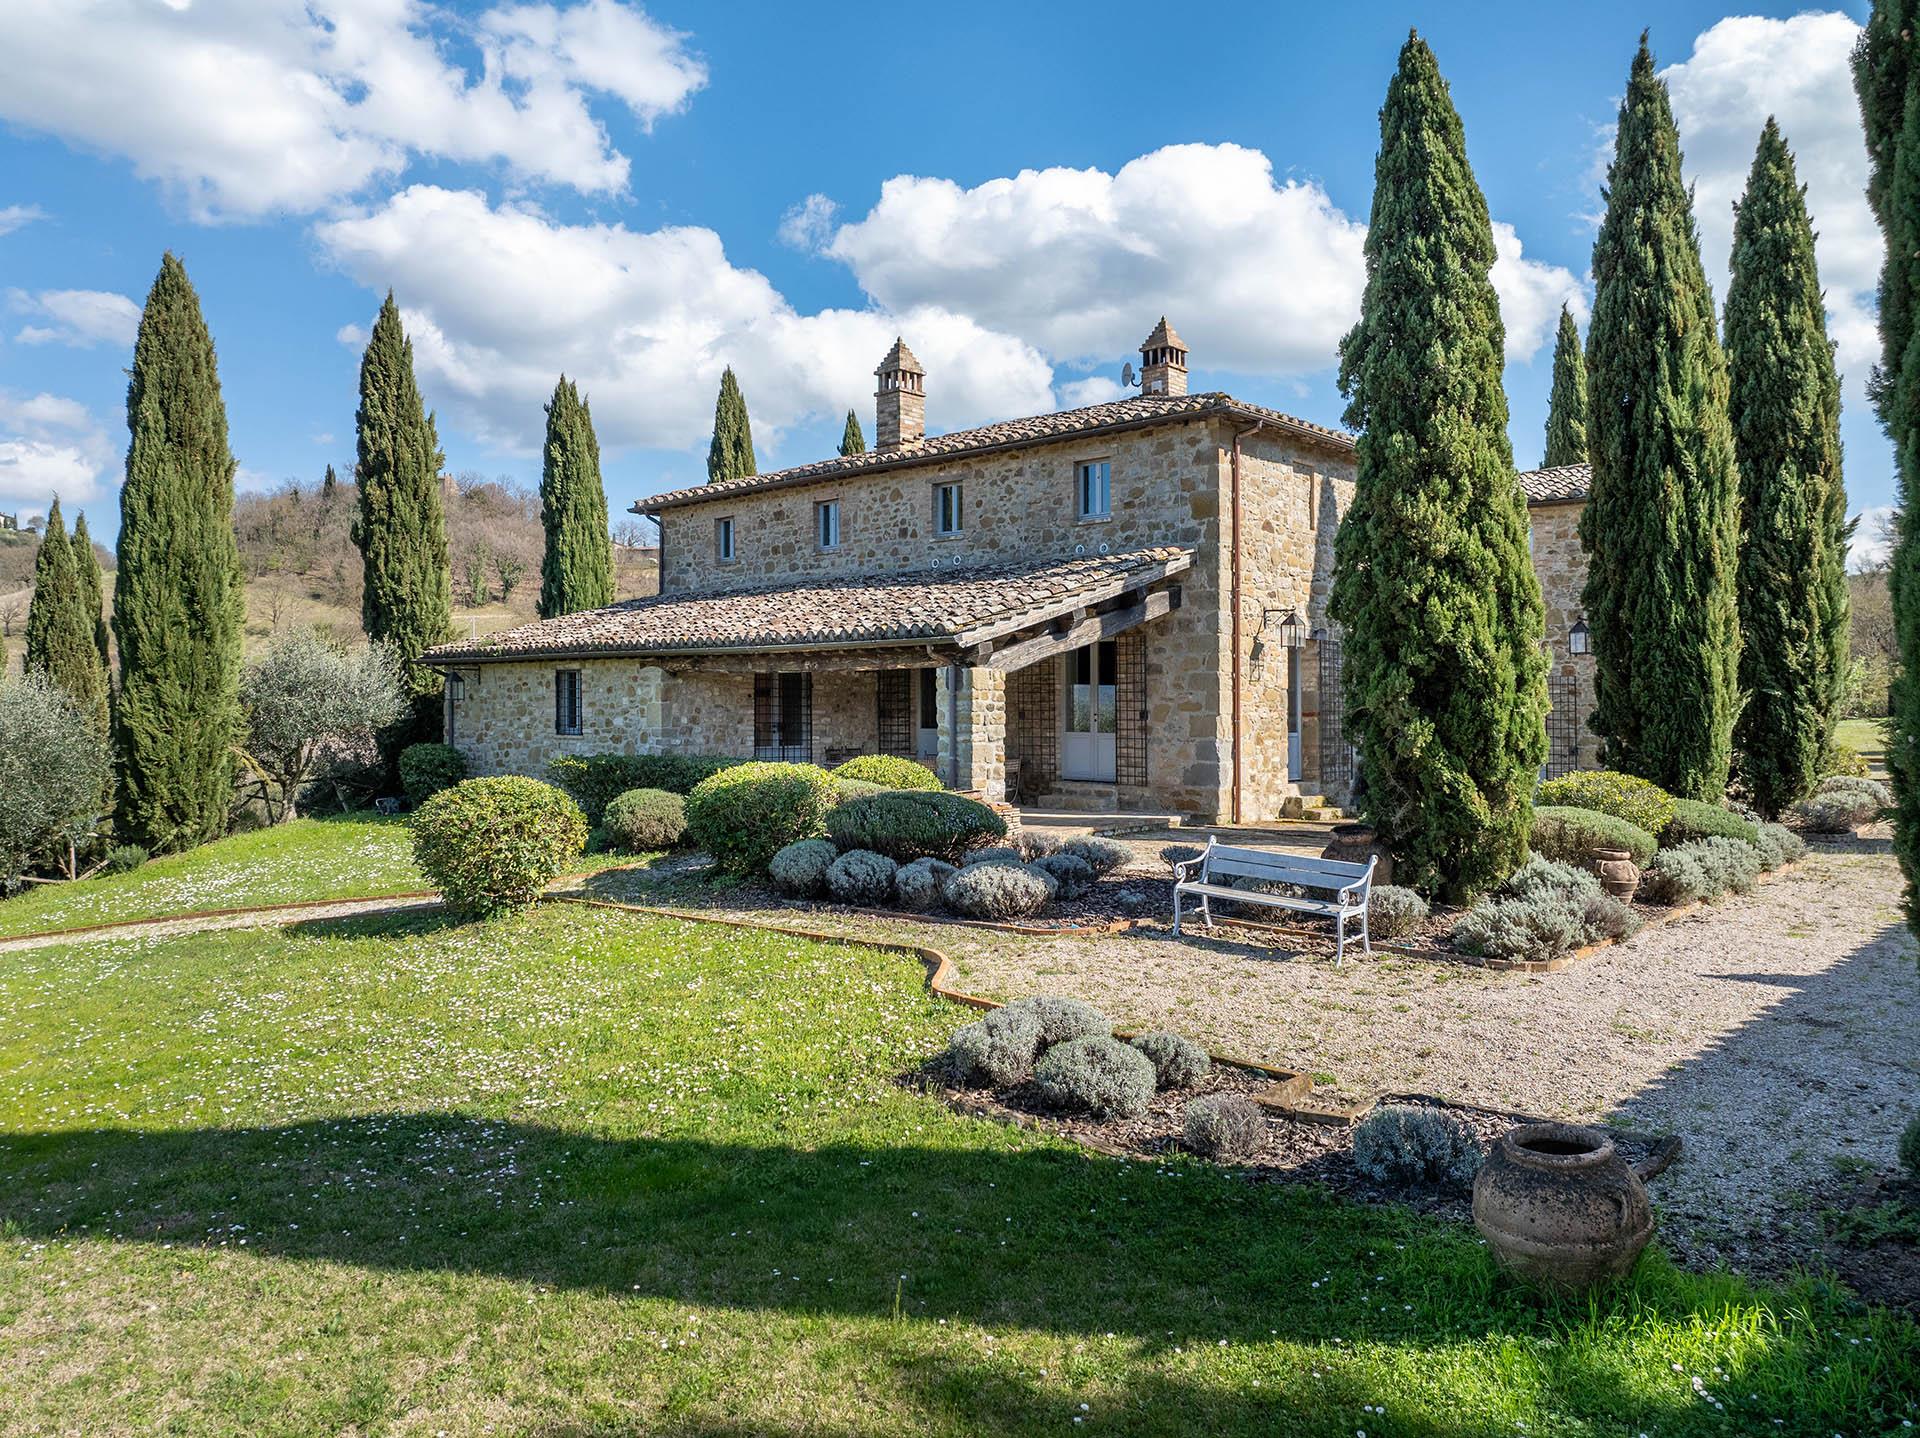 Charming farmhouse in the Umbrian countryside